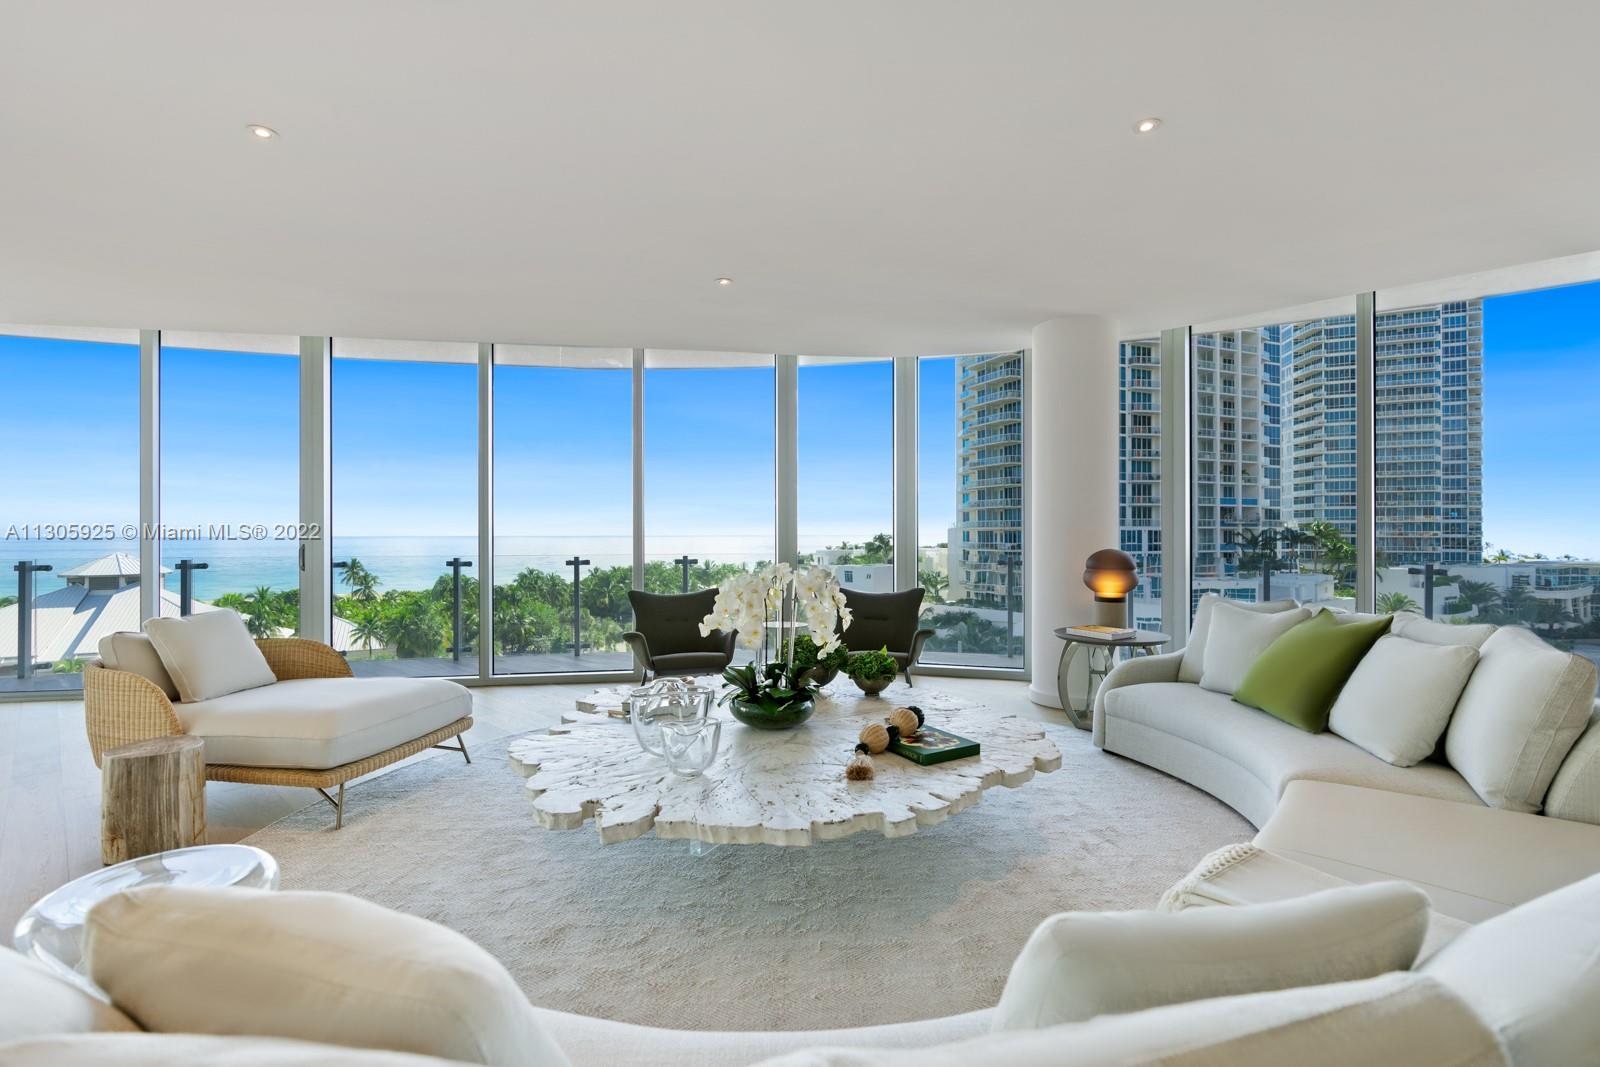 Listing Image 1 Collins Ave #706